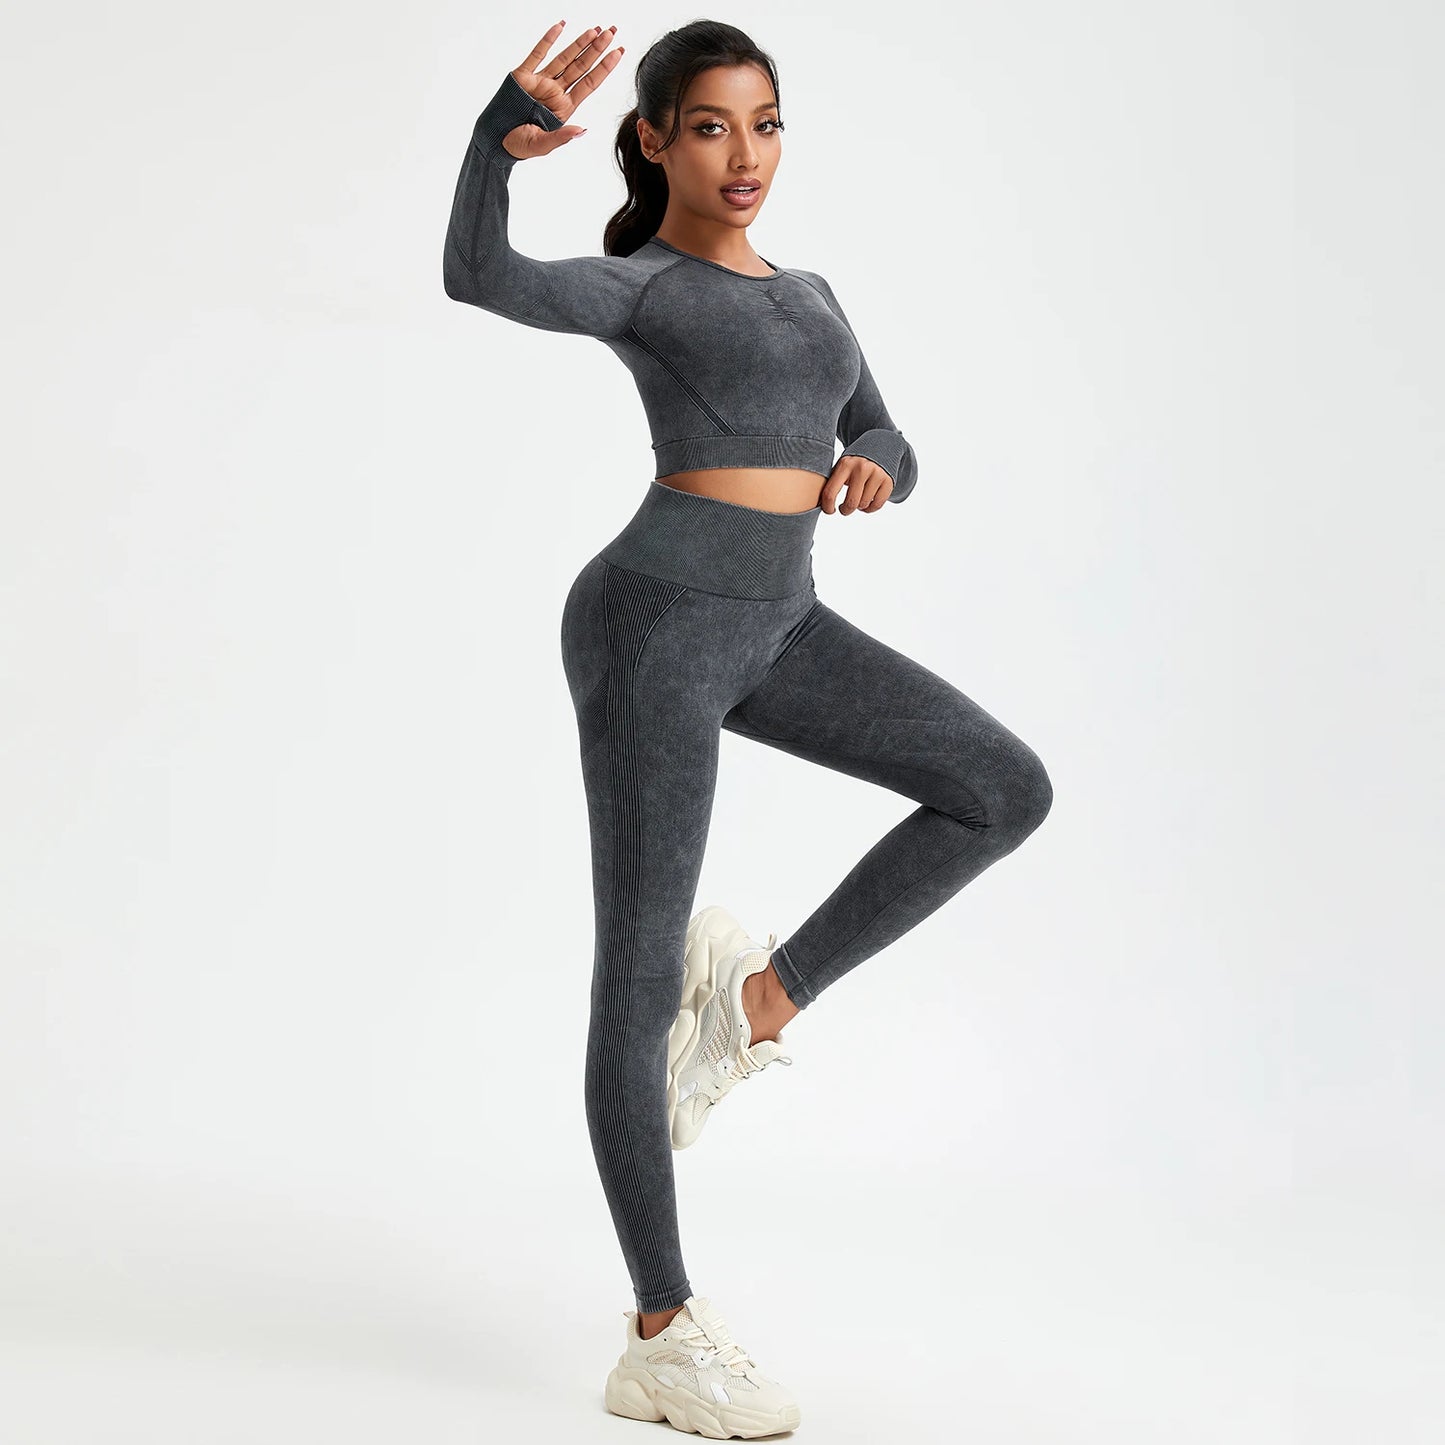 Women’s skinny stretch active pant set